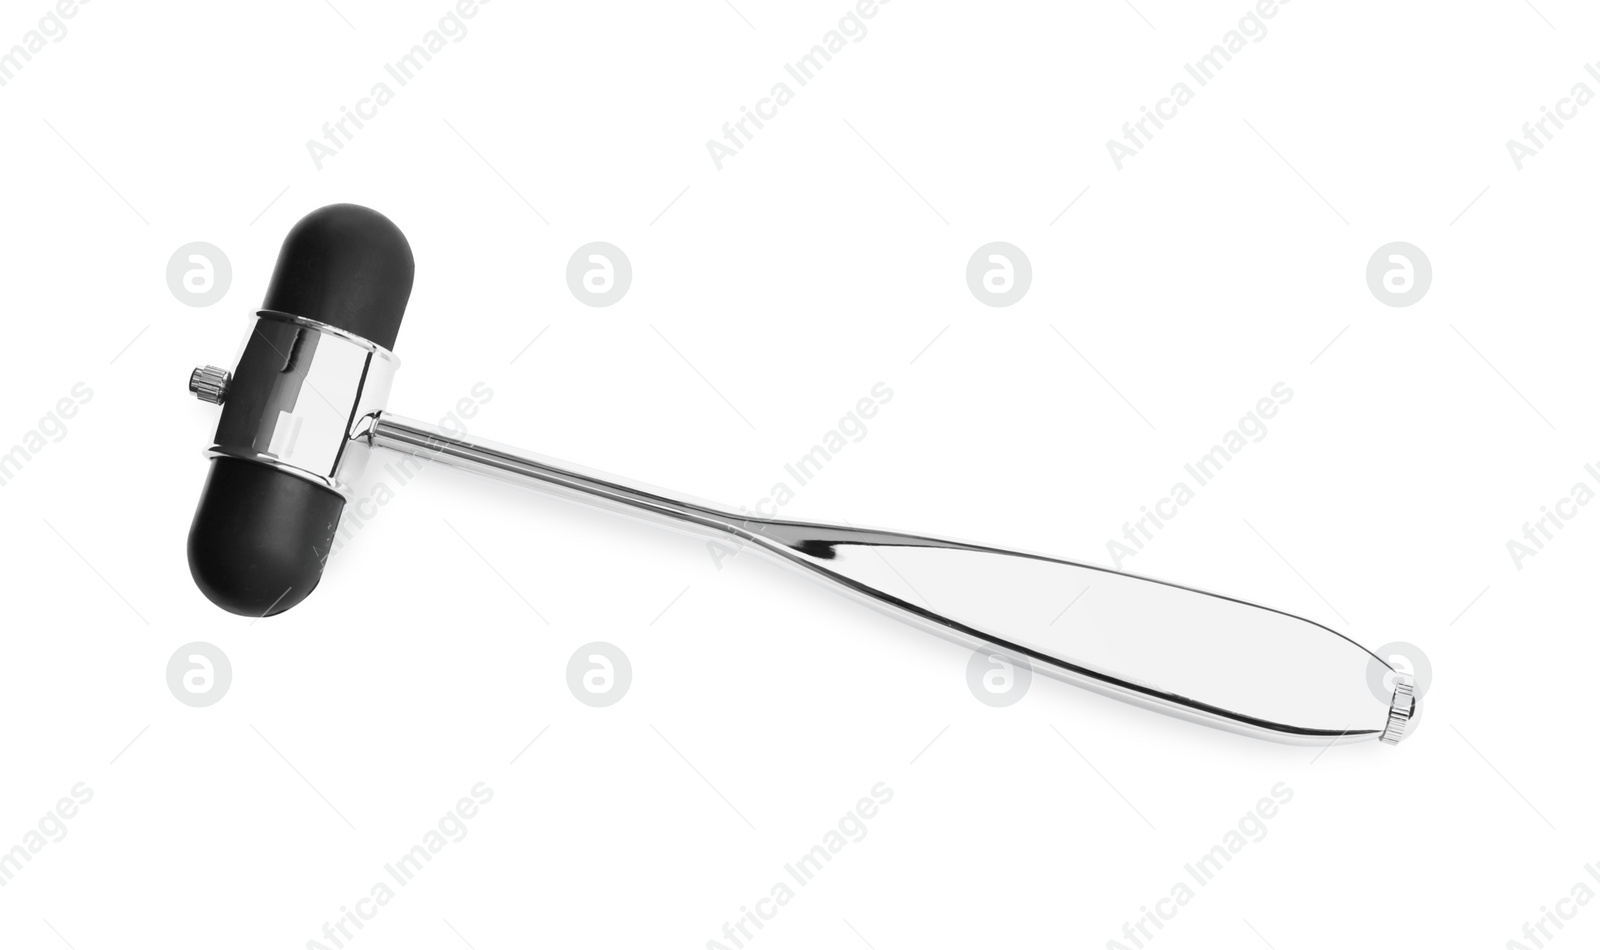 Photo of Reflex hammer isolated on white, top view. Nervous system diagnostic